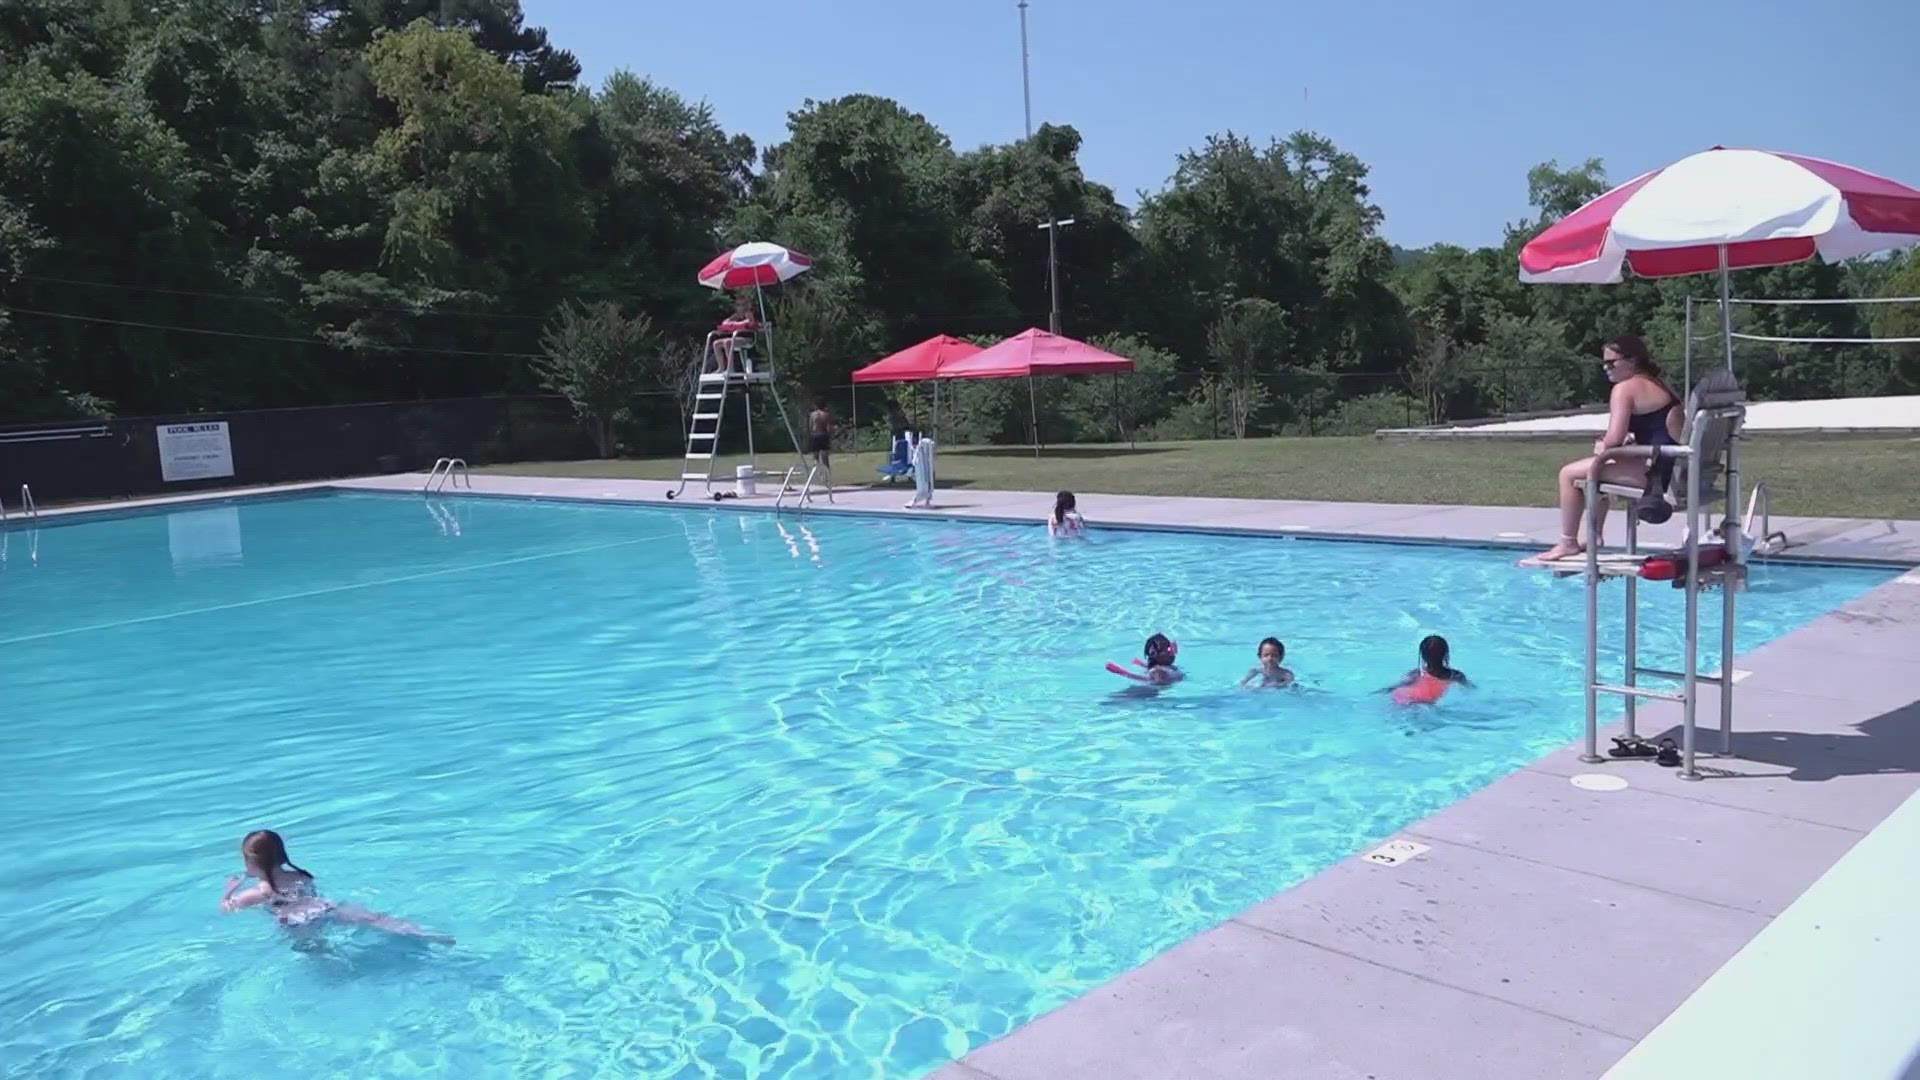 The City of Knoxville shares its plan for water-based summer activities.